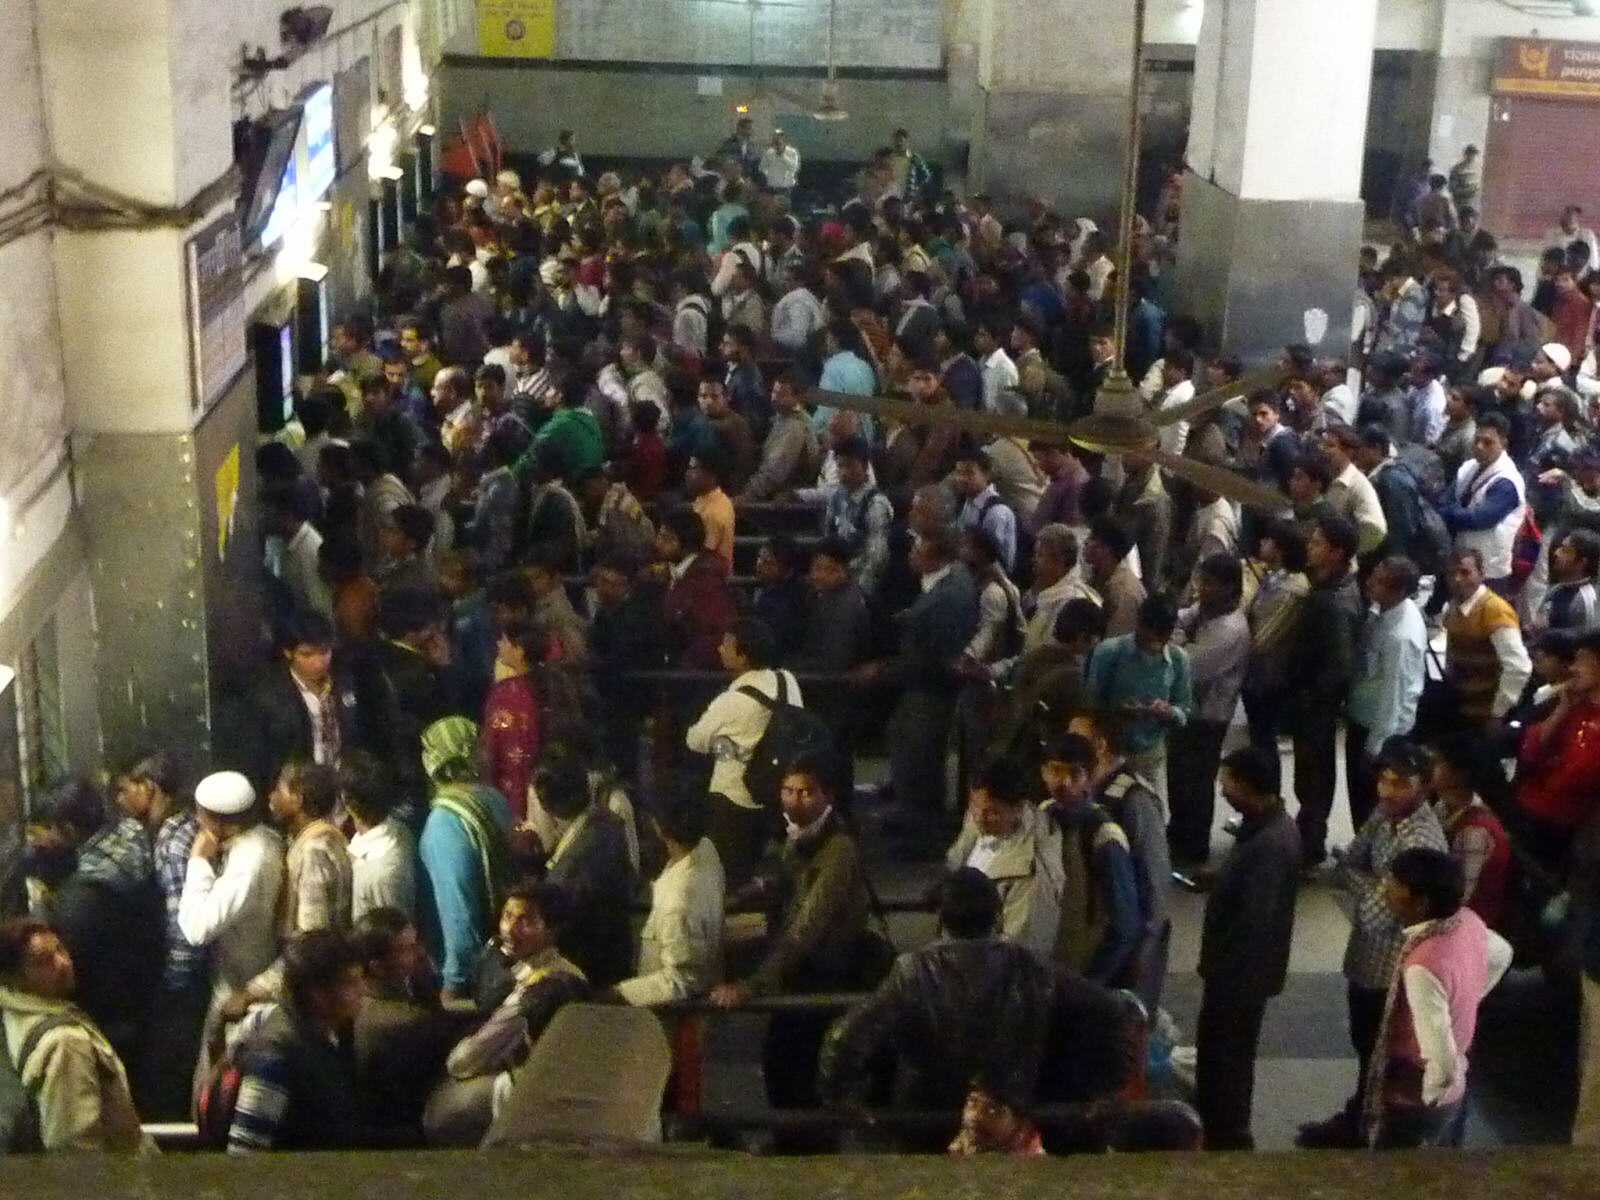 Rather crowded ticket office at Delhi main station